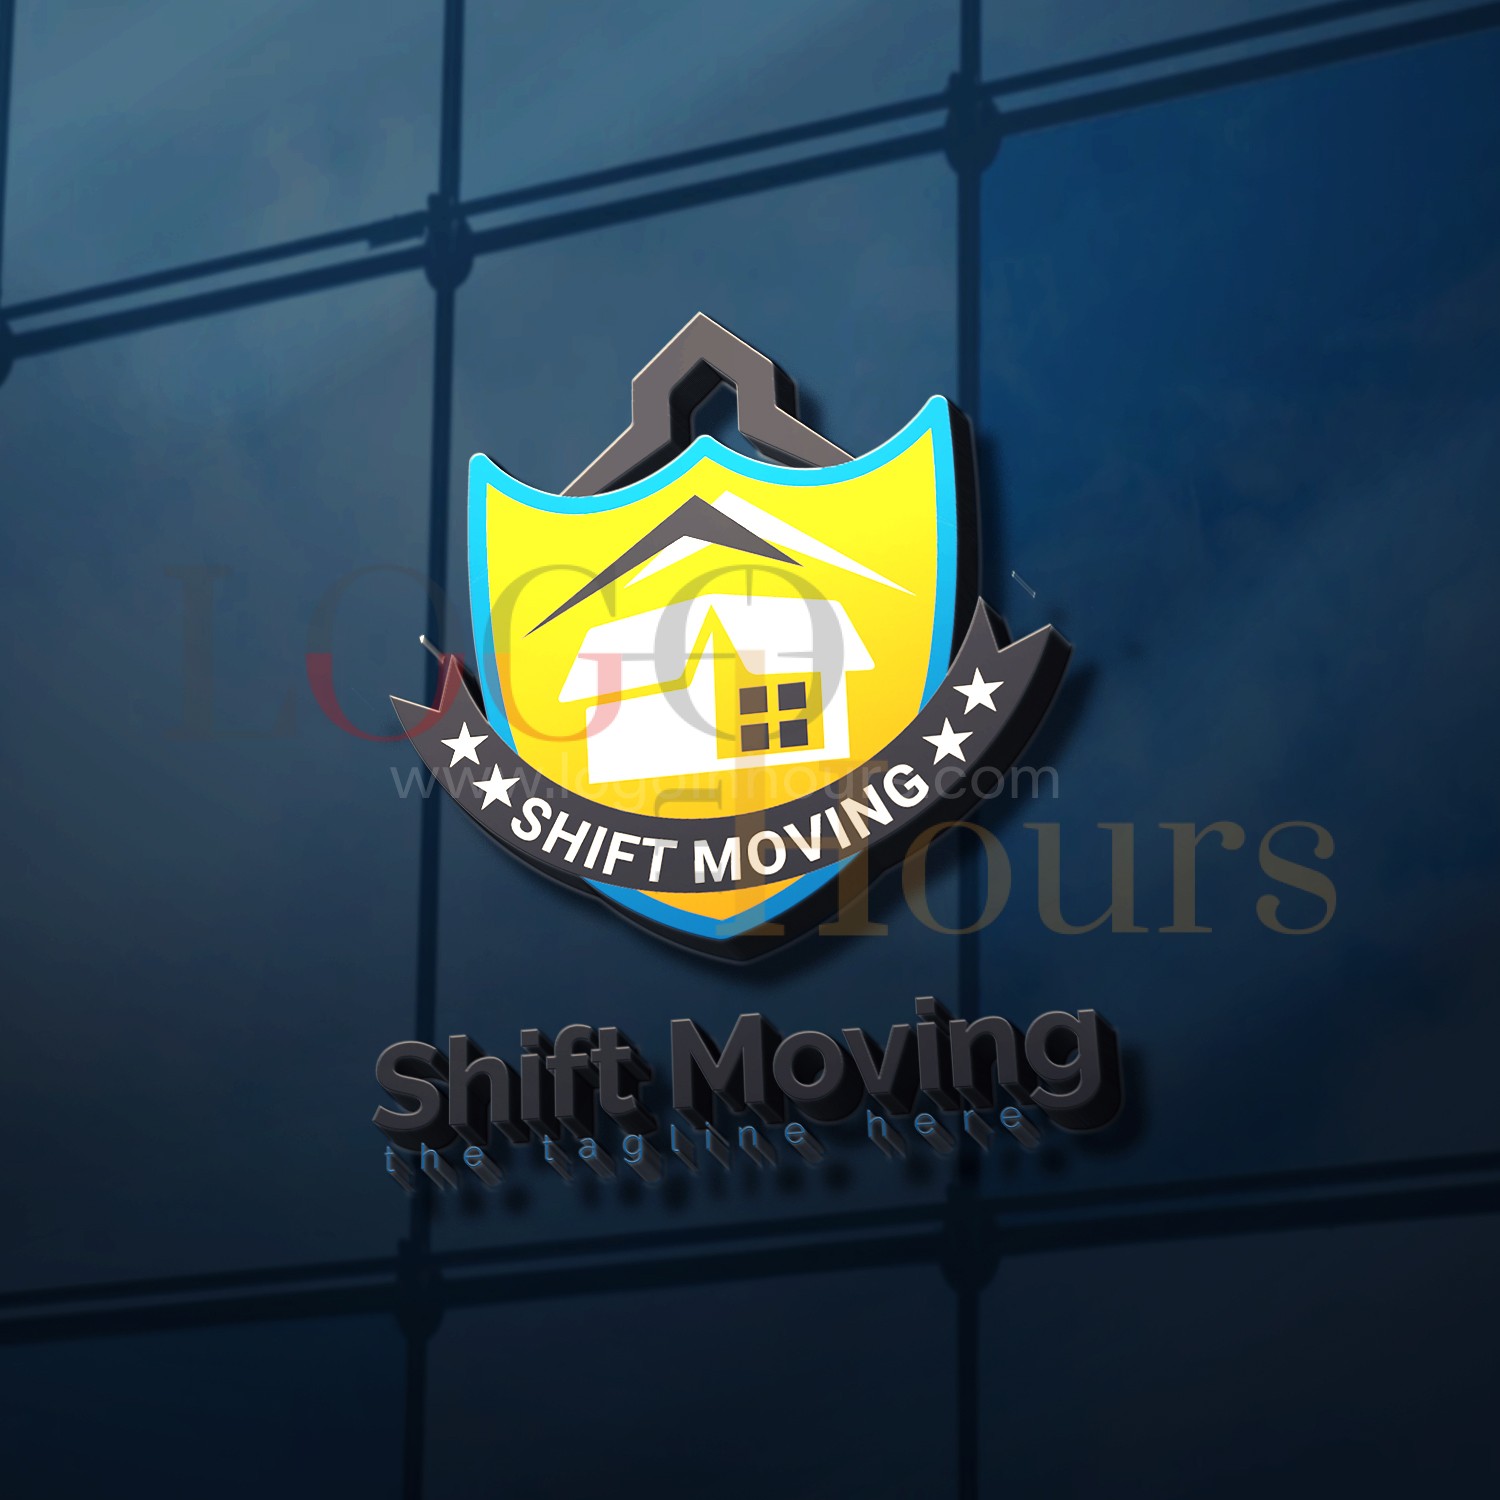 Moving Company | LOGO DESIGN IN HOURS Moving company logo